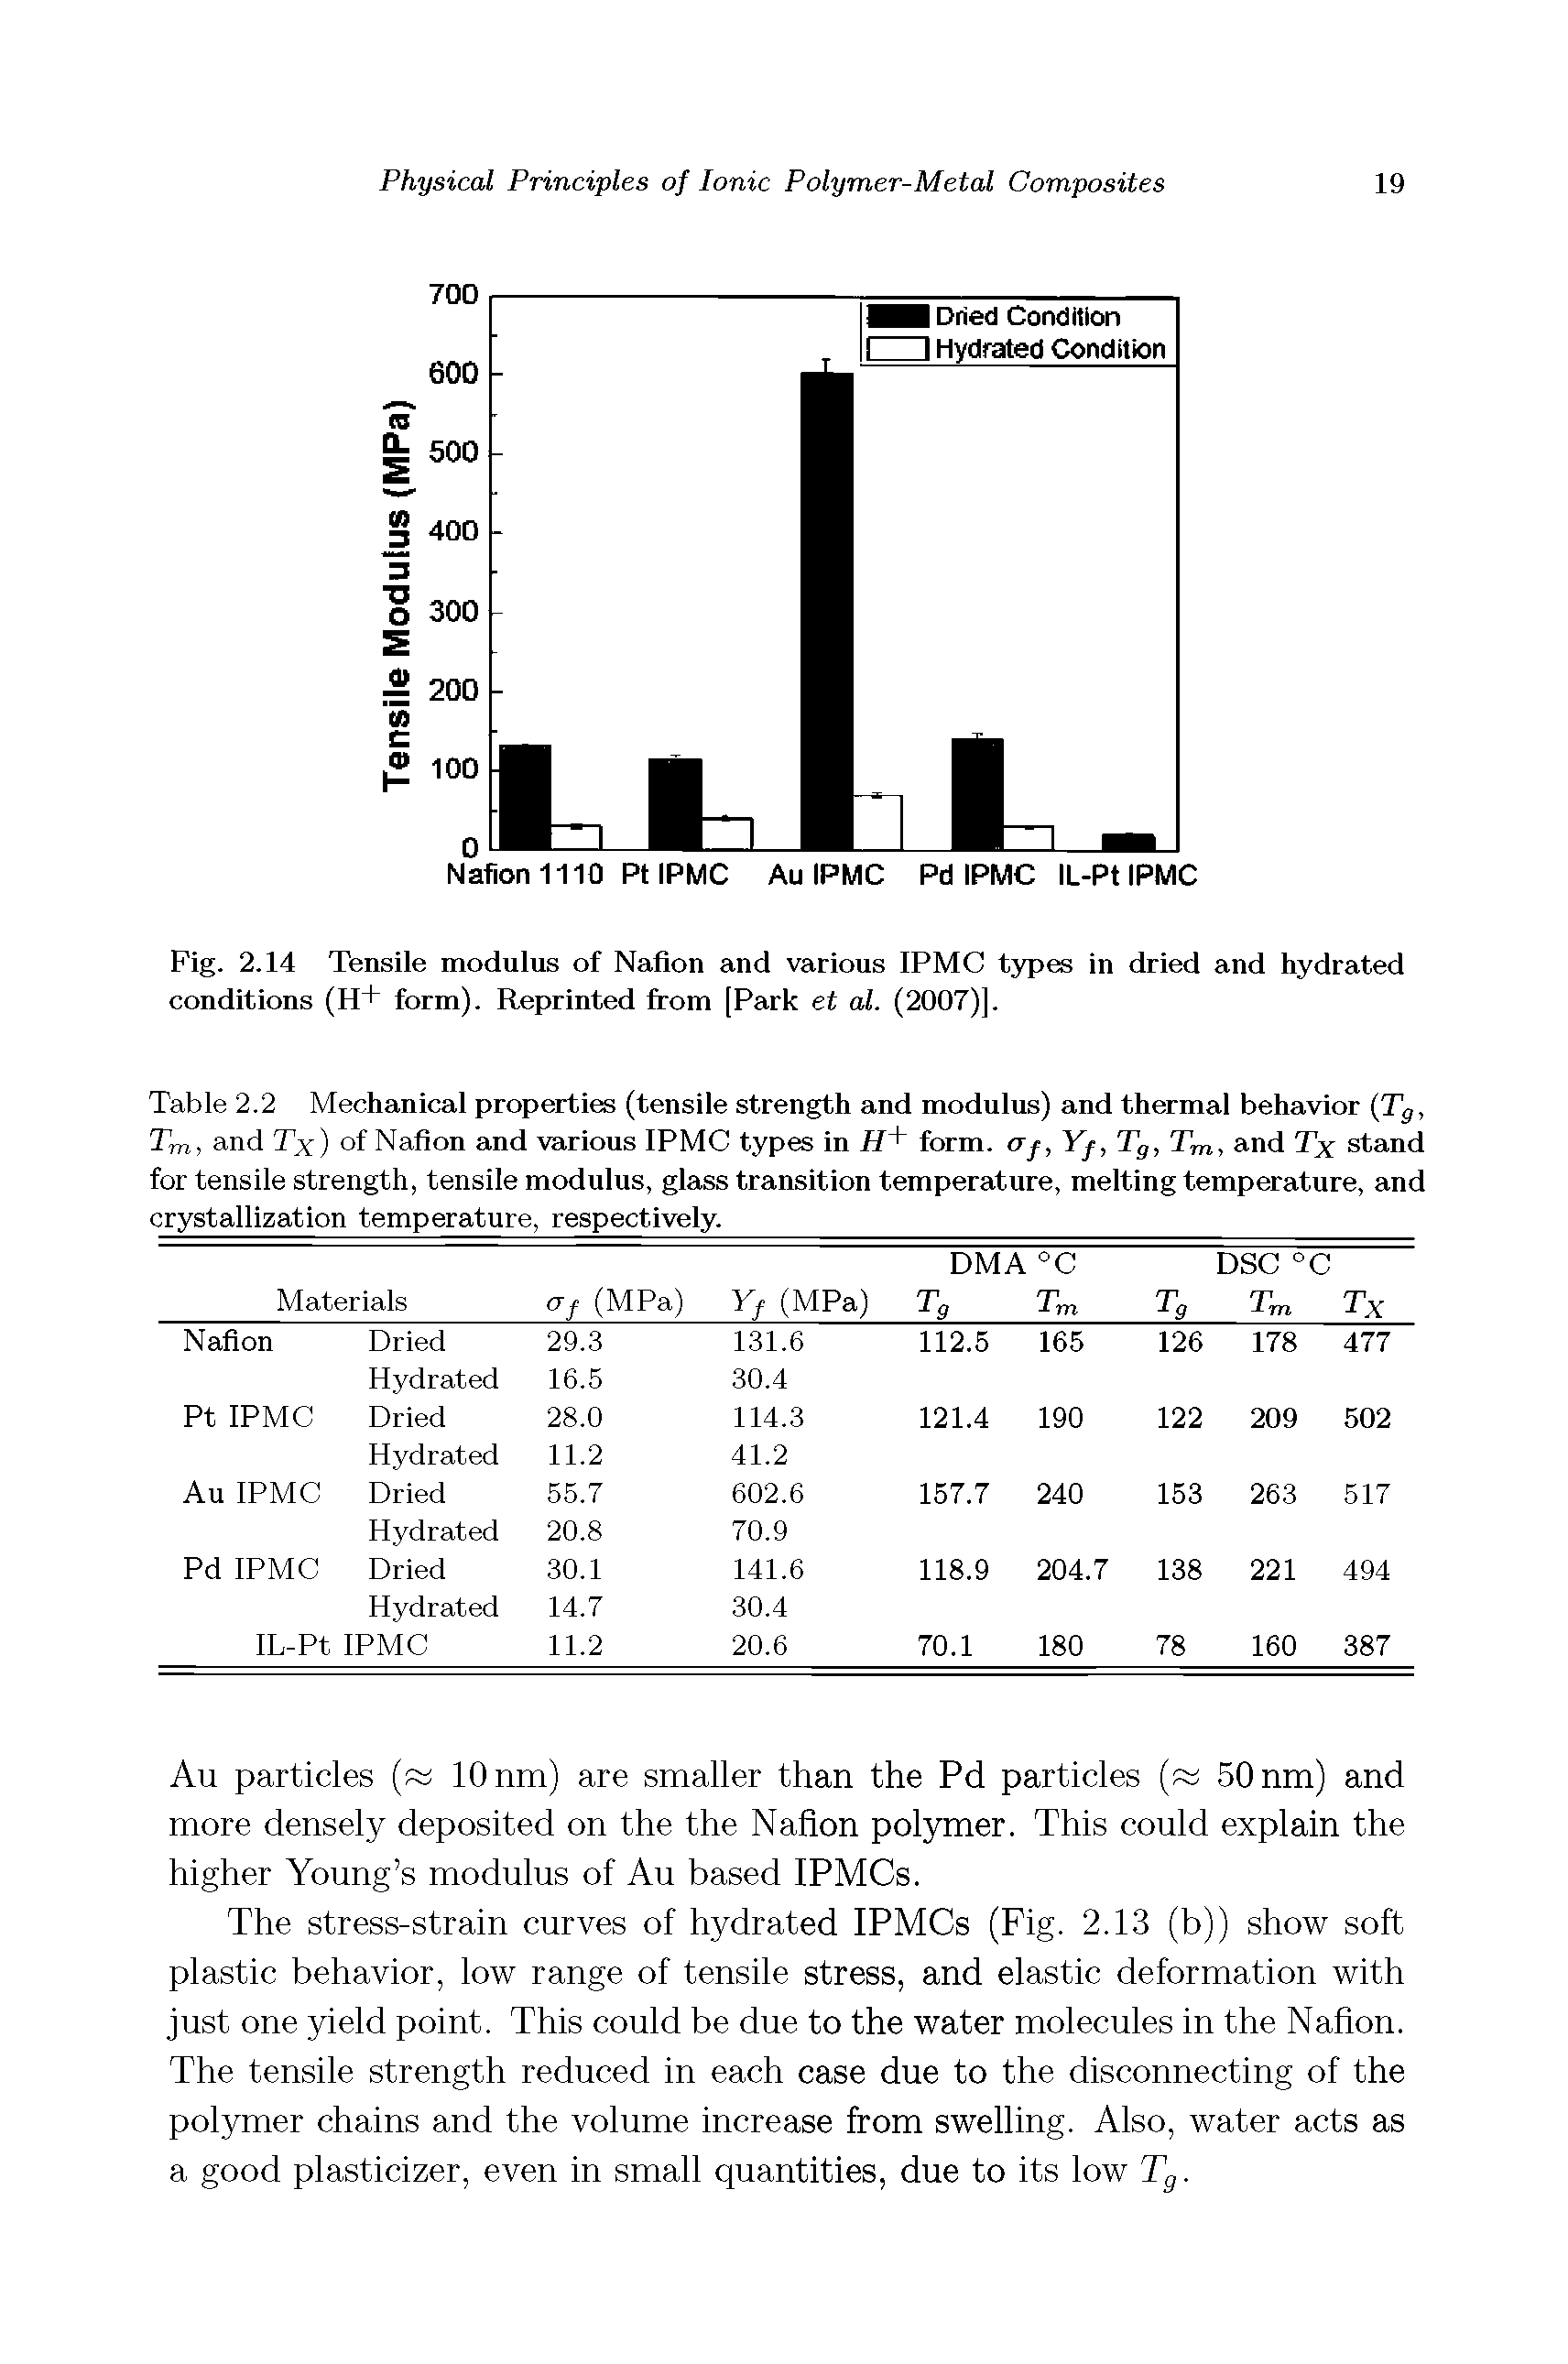 Table 2.2 Mechanical properties (tensile strength and modulus) and thermal behavior (Tg, Tm, and Ty) of Nation and various IPMC types in i7+ form, af, Yf, Tg, Tm, and Tx stand for tensile strength, tensile modulus, glass transition temperature, melting temperature, and crystallization temperature, respectively.